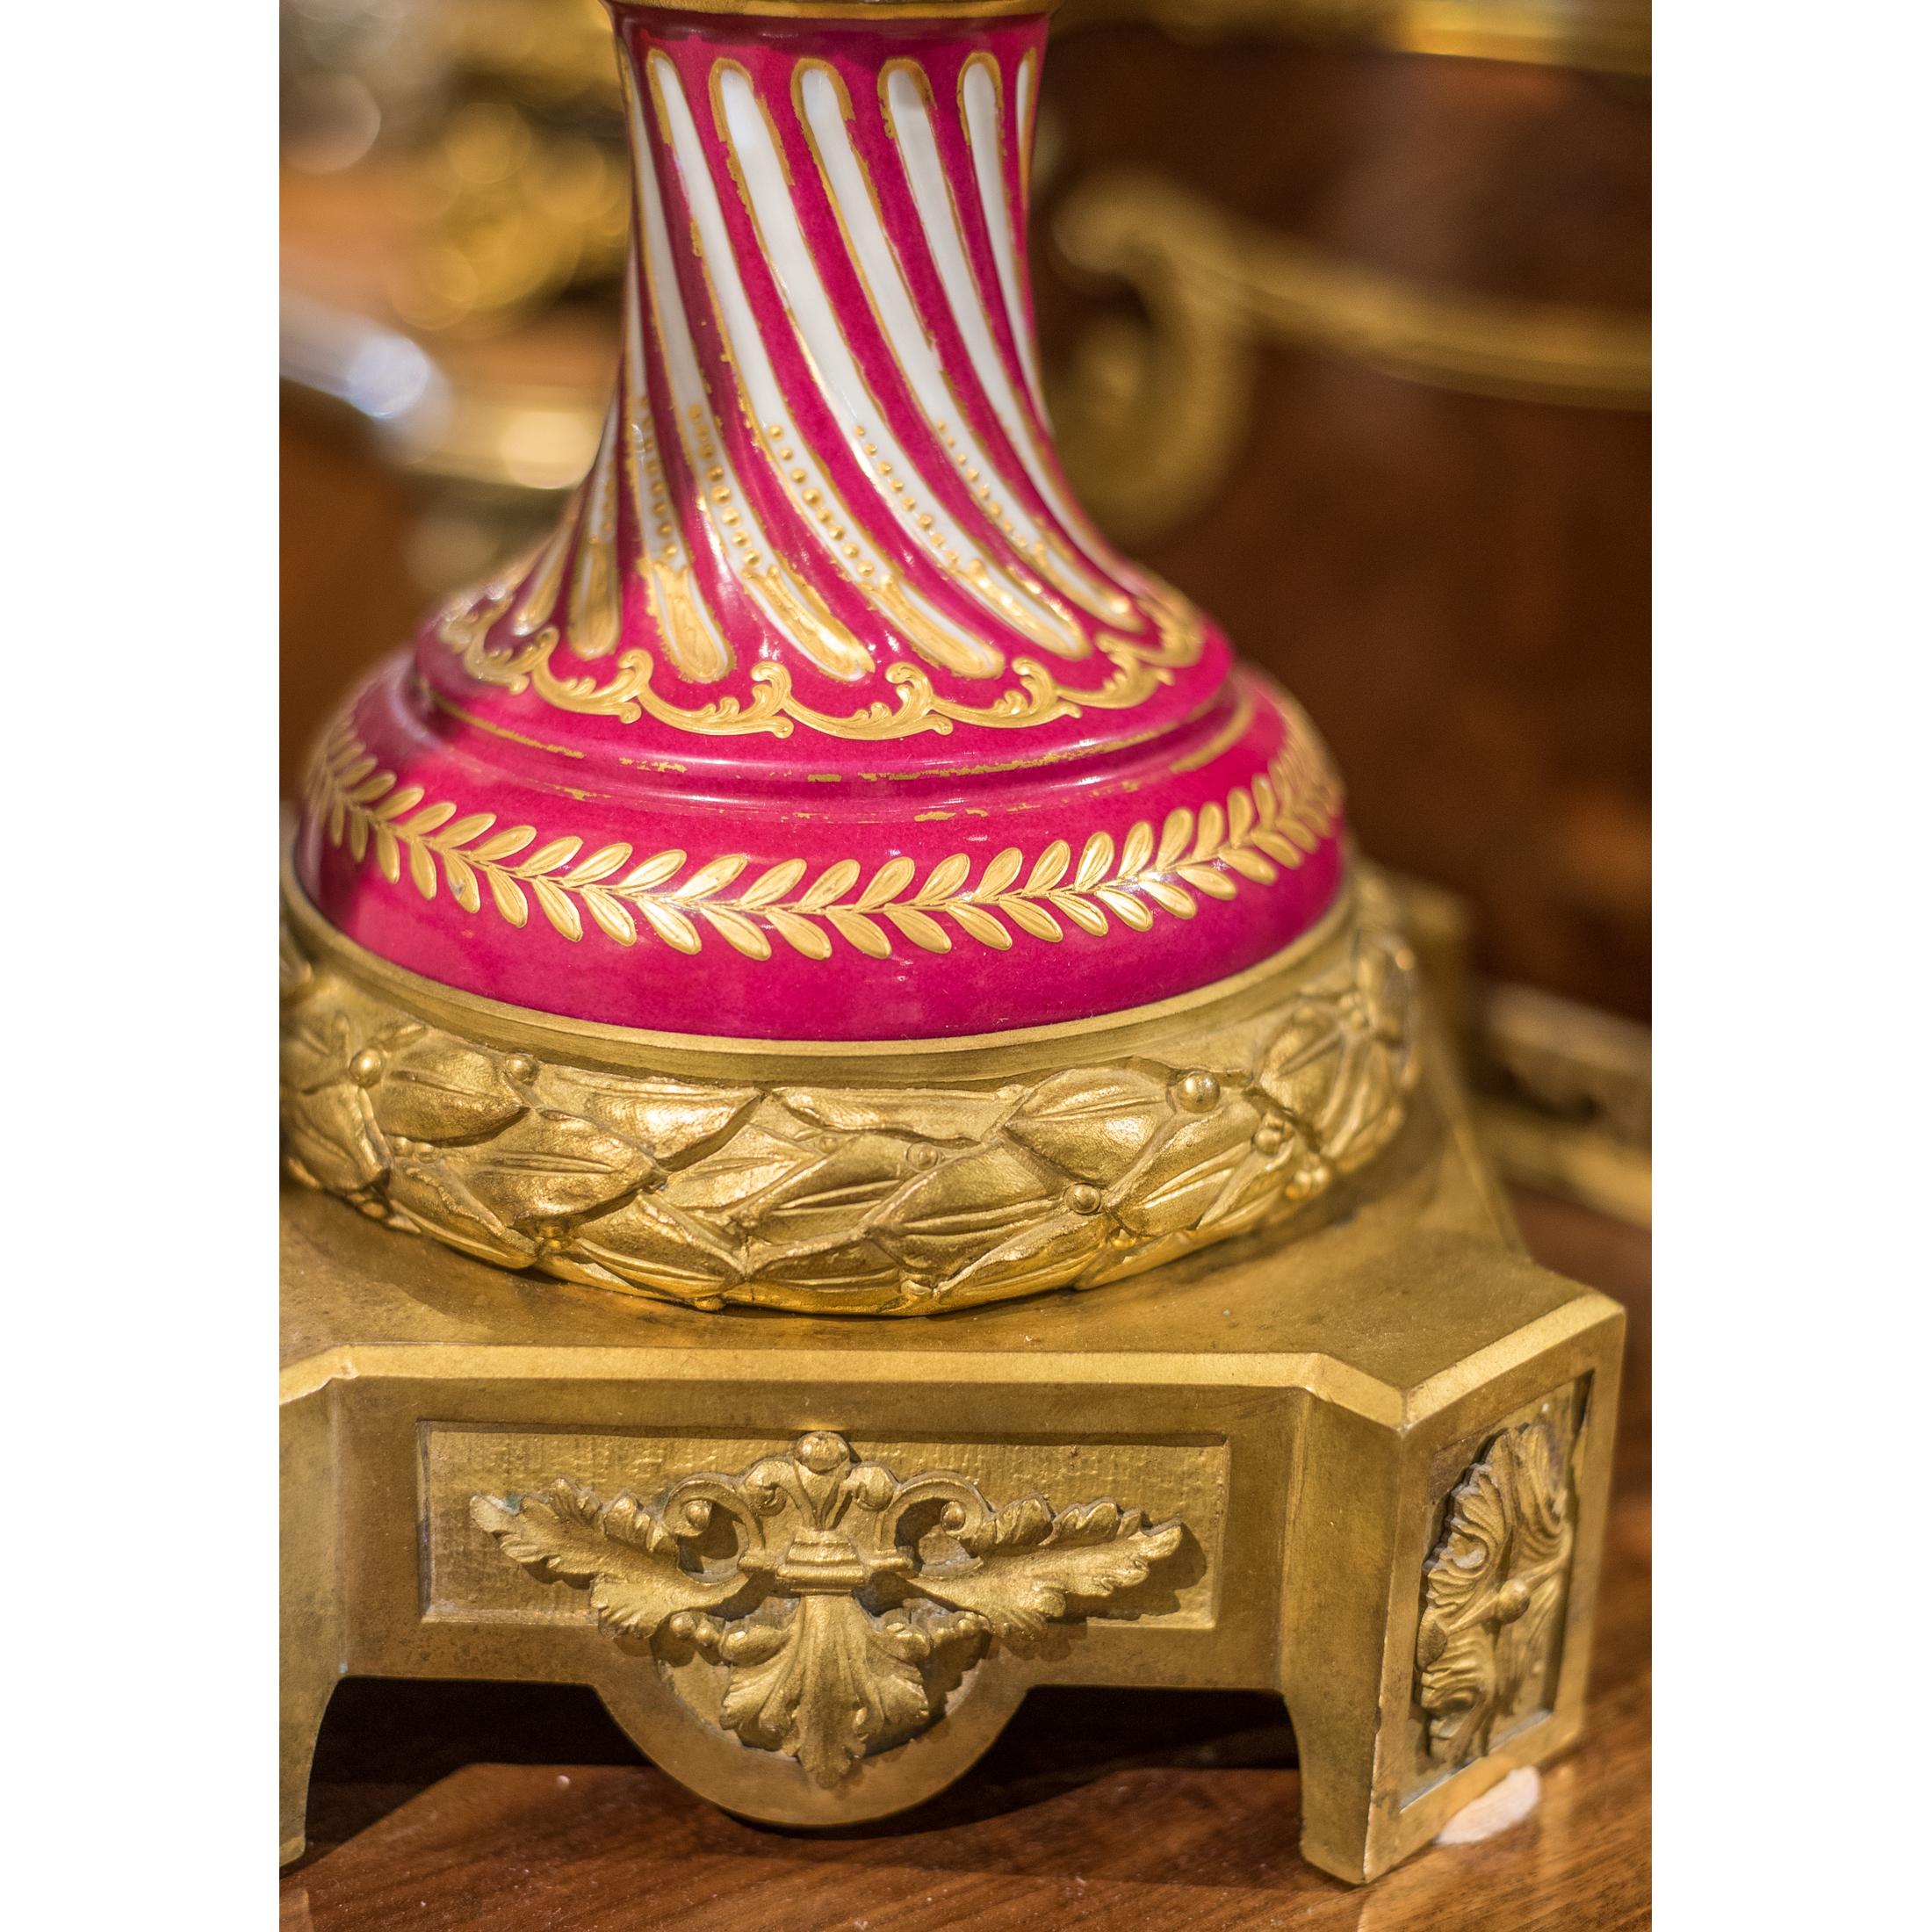 Late 19th Century French Ormolu-Mounted Sèvres-style Porcelain Urn 2